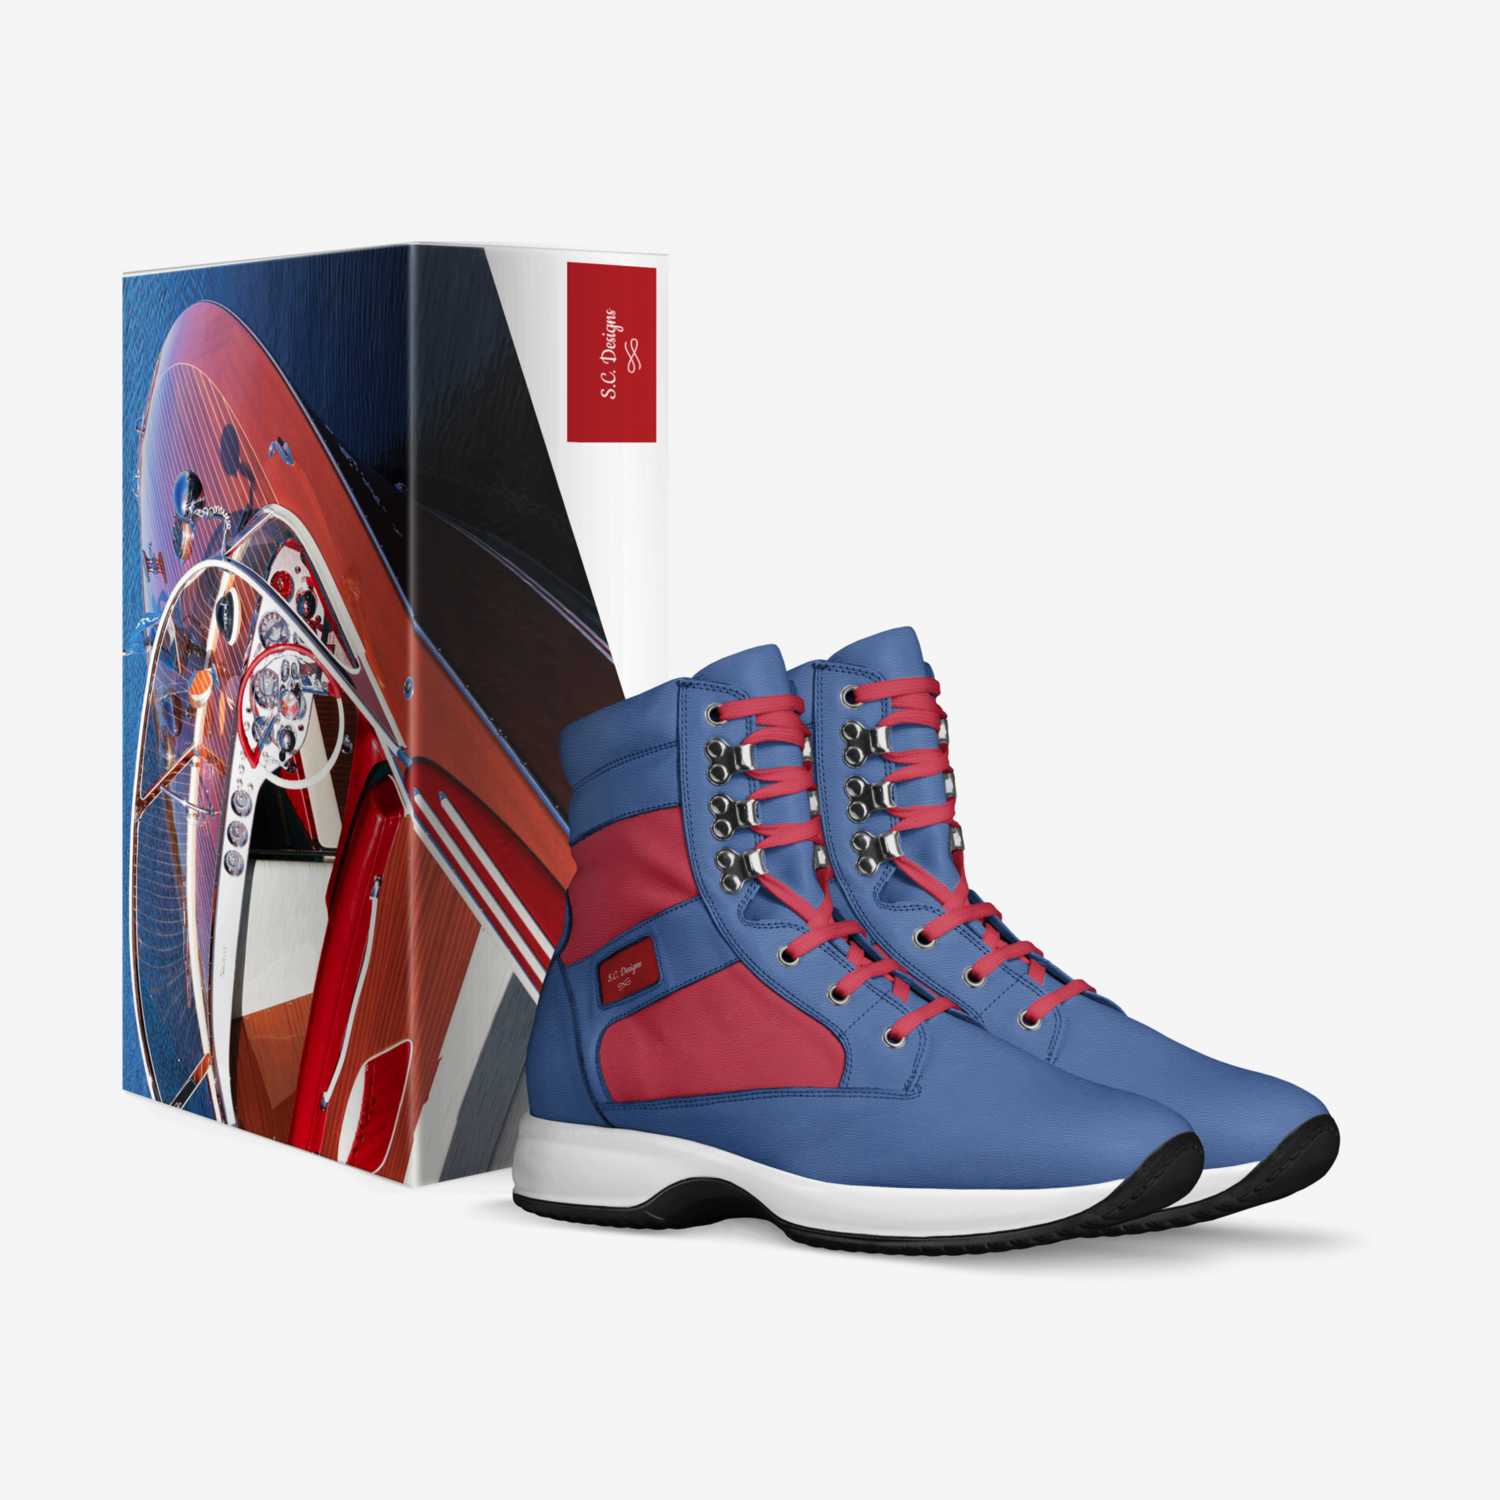 S.C. Designs custom made in Italy shoes by David Wynn | Box view